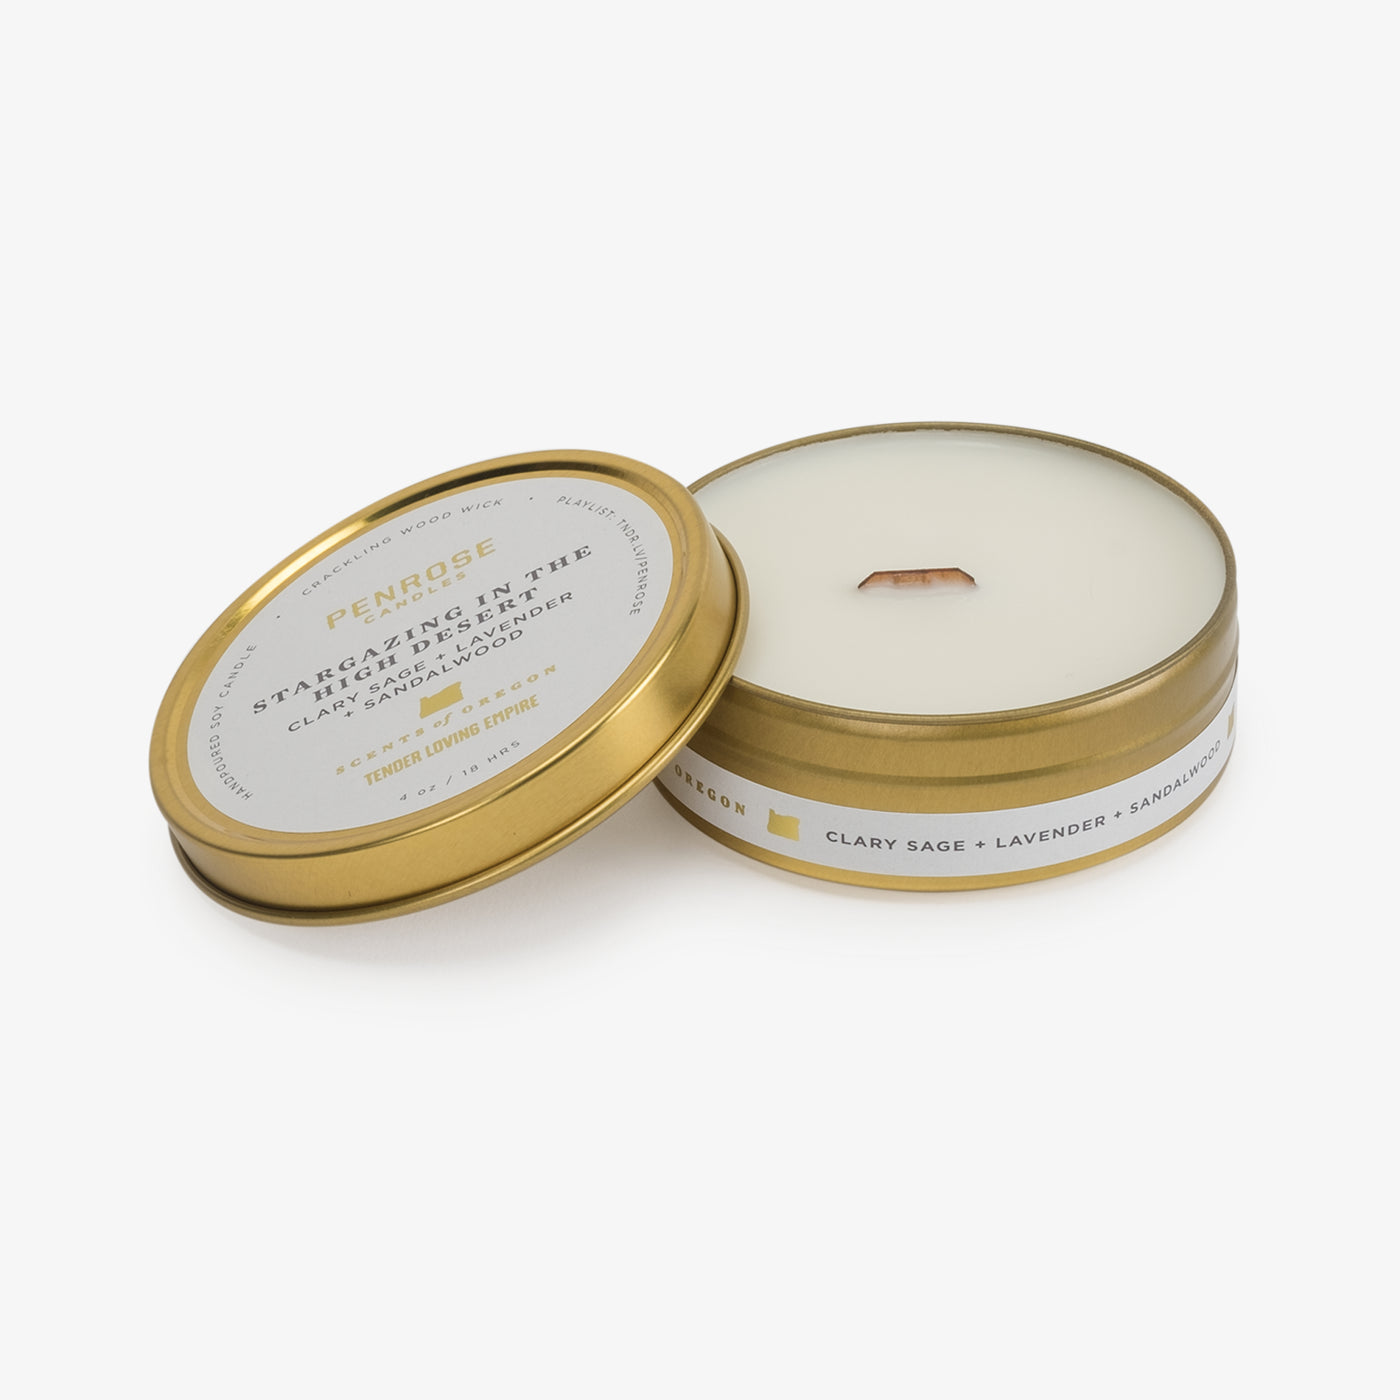 Scents of Oregon: High Desert Travel Candle